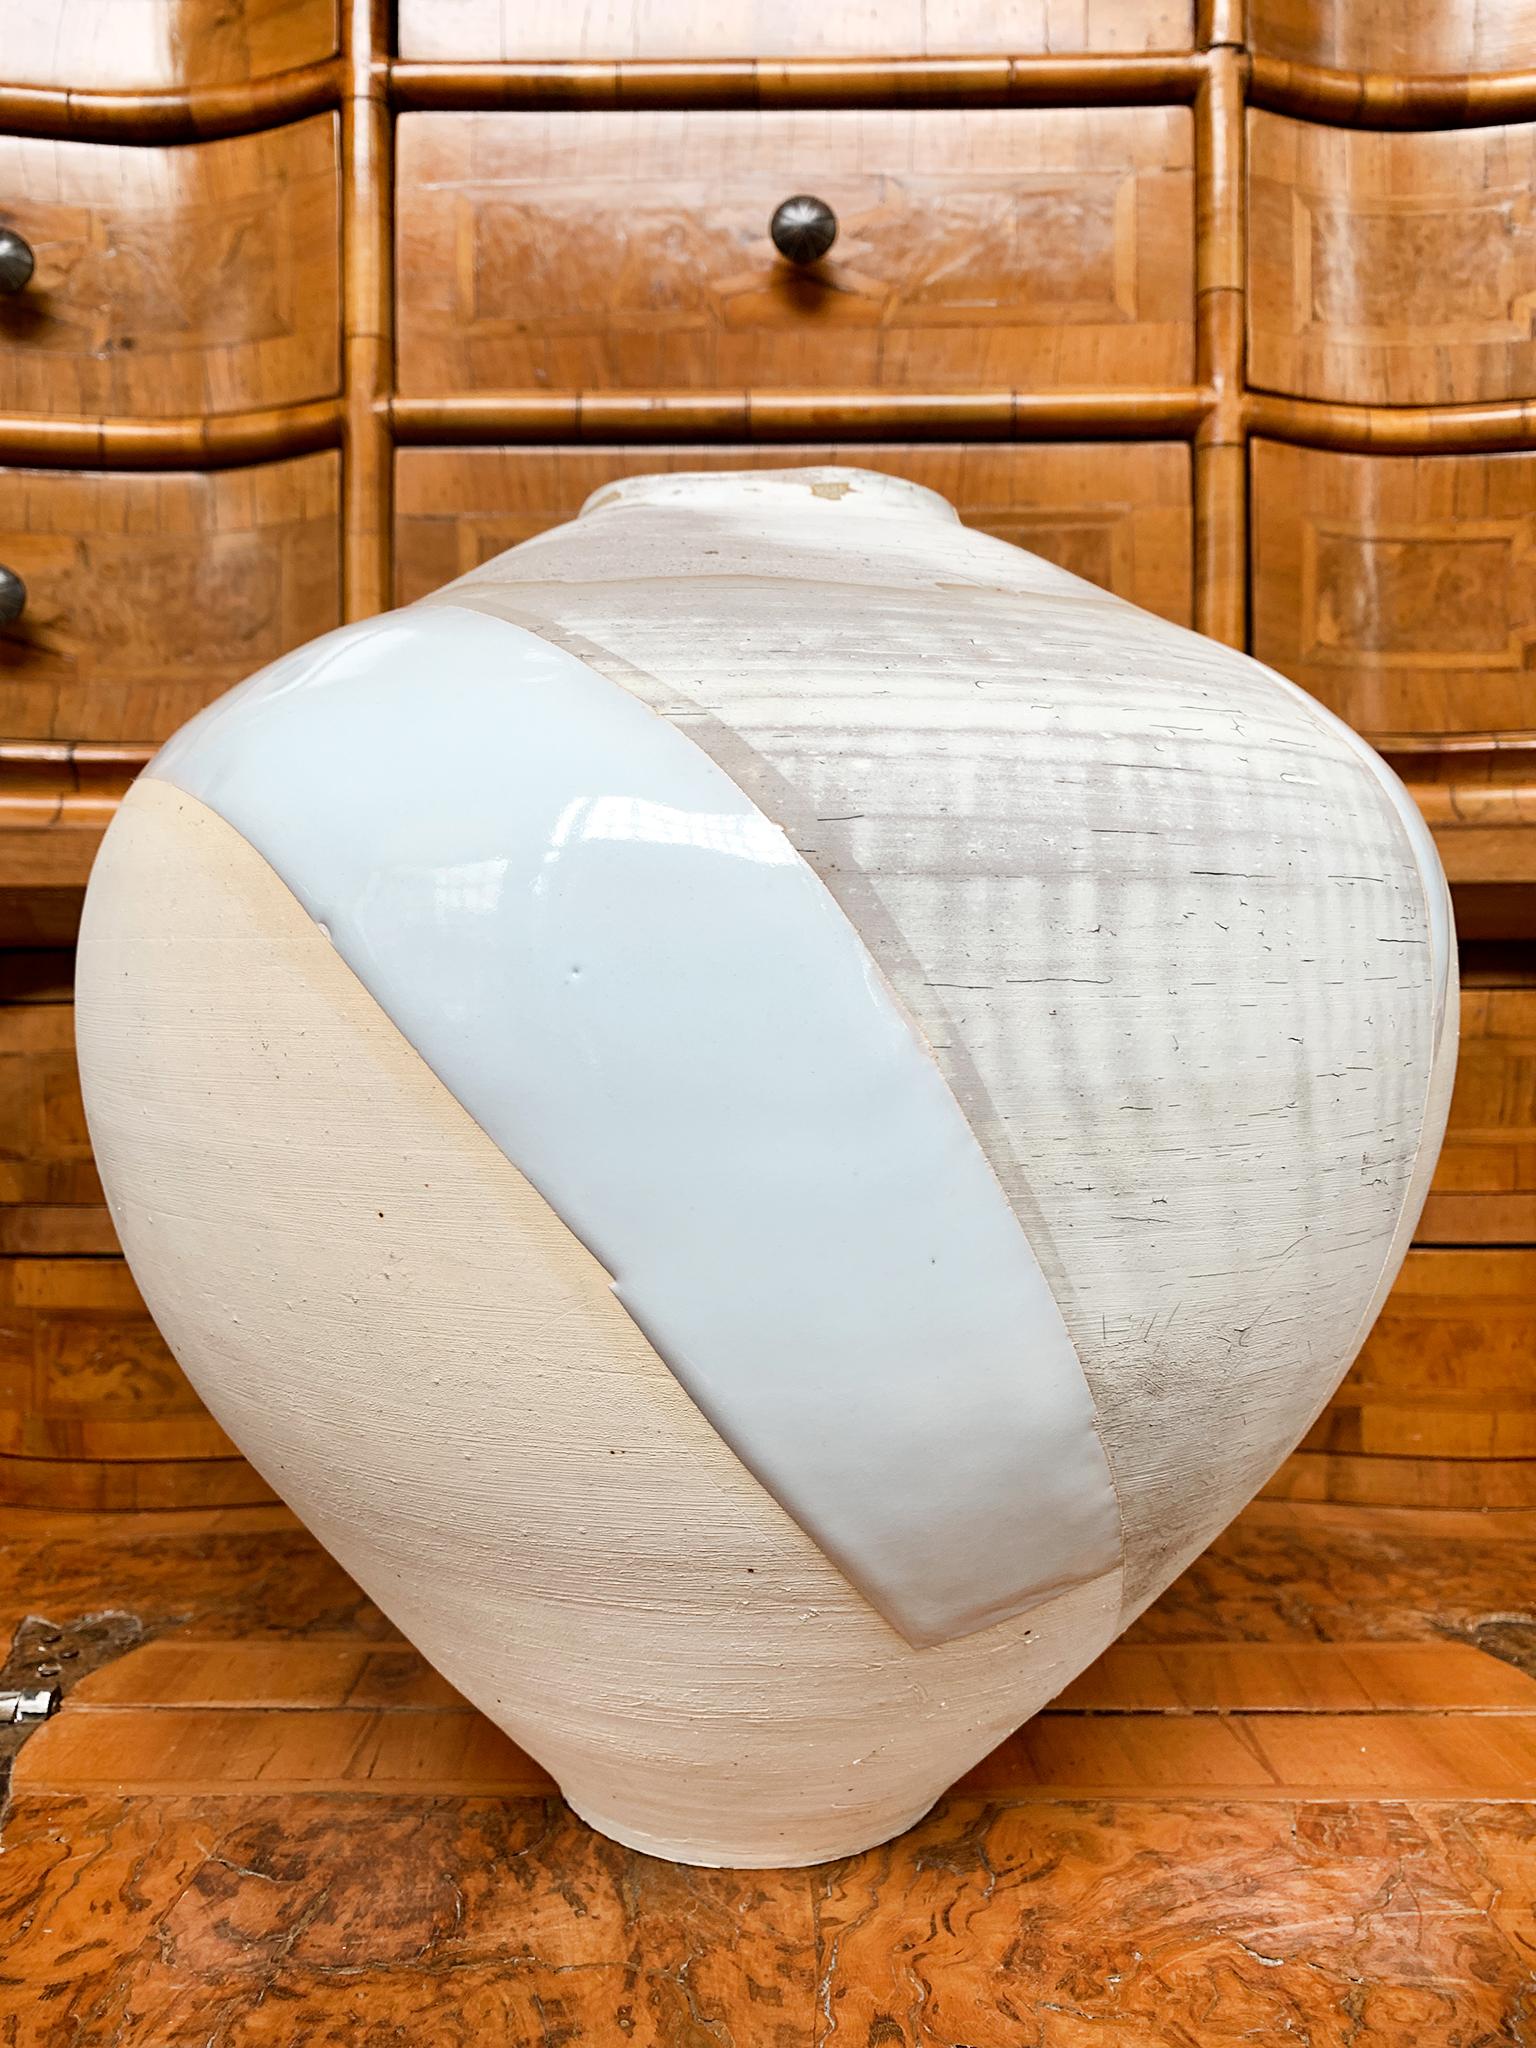 From a series of fashion-inspired ceramics by Thom Lussier, hand-crafted exclusively for Cafiero Select. Smooth glaze and matte, crackled finish create an evocative mix of textures and pastel hues composed like a couture, color-block dress!

White